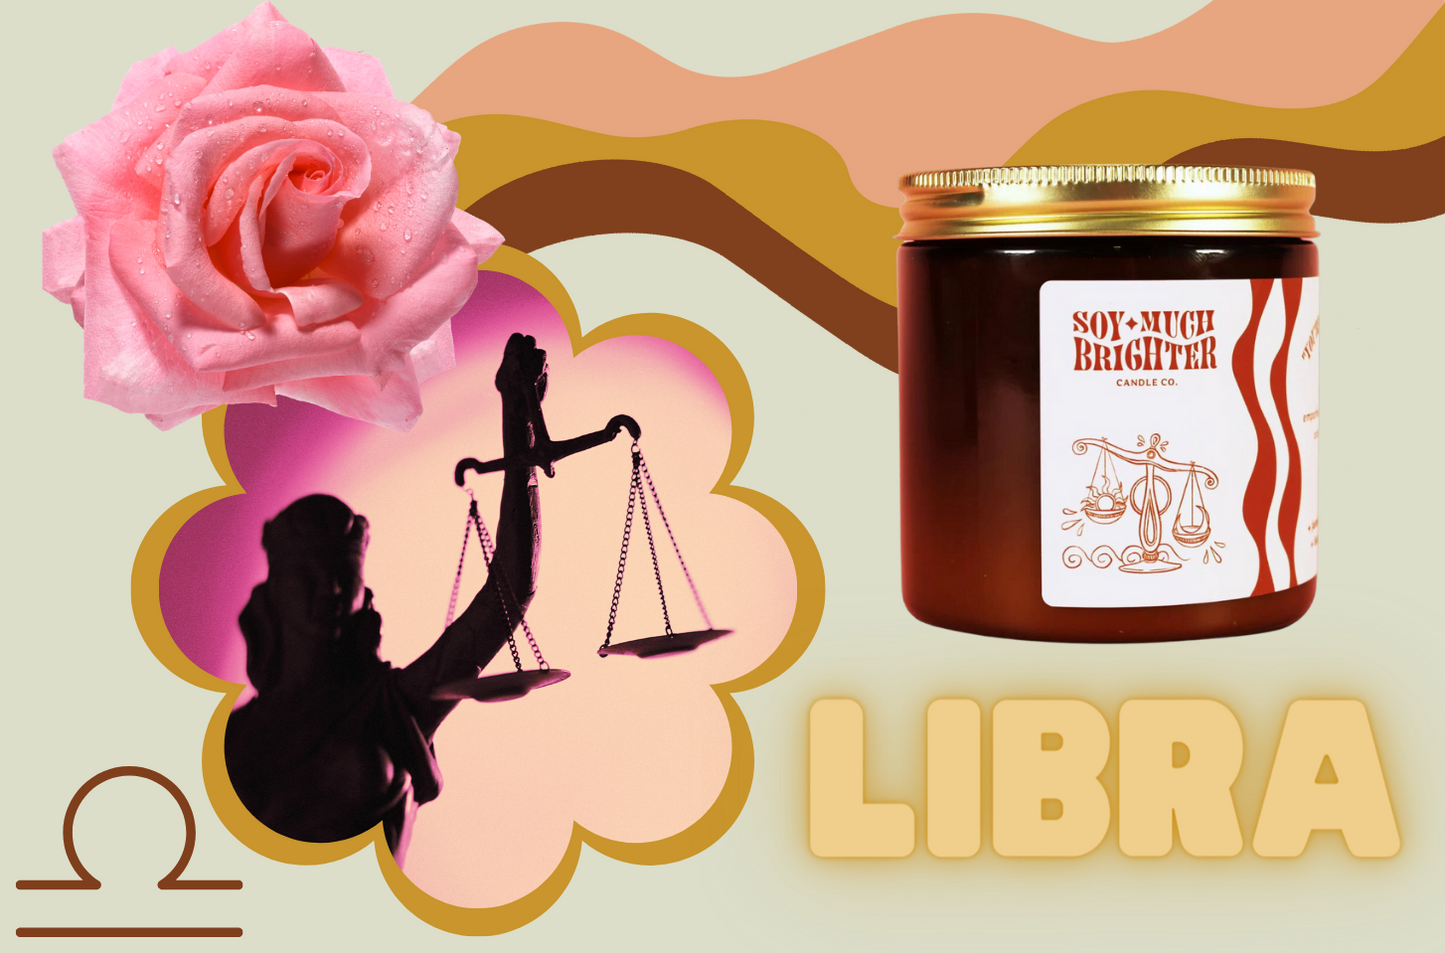 A collage of Libra-related elements, featuring a pink rose, a statue of Lady Justice holding scales, the symbol for Libra, our Libra candle and the word “Libra.”